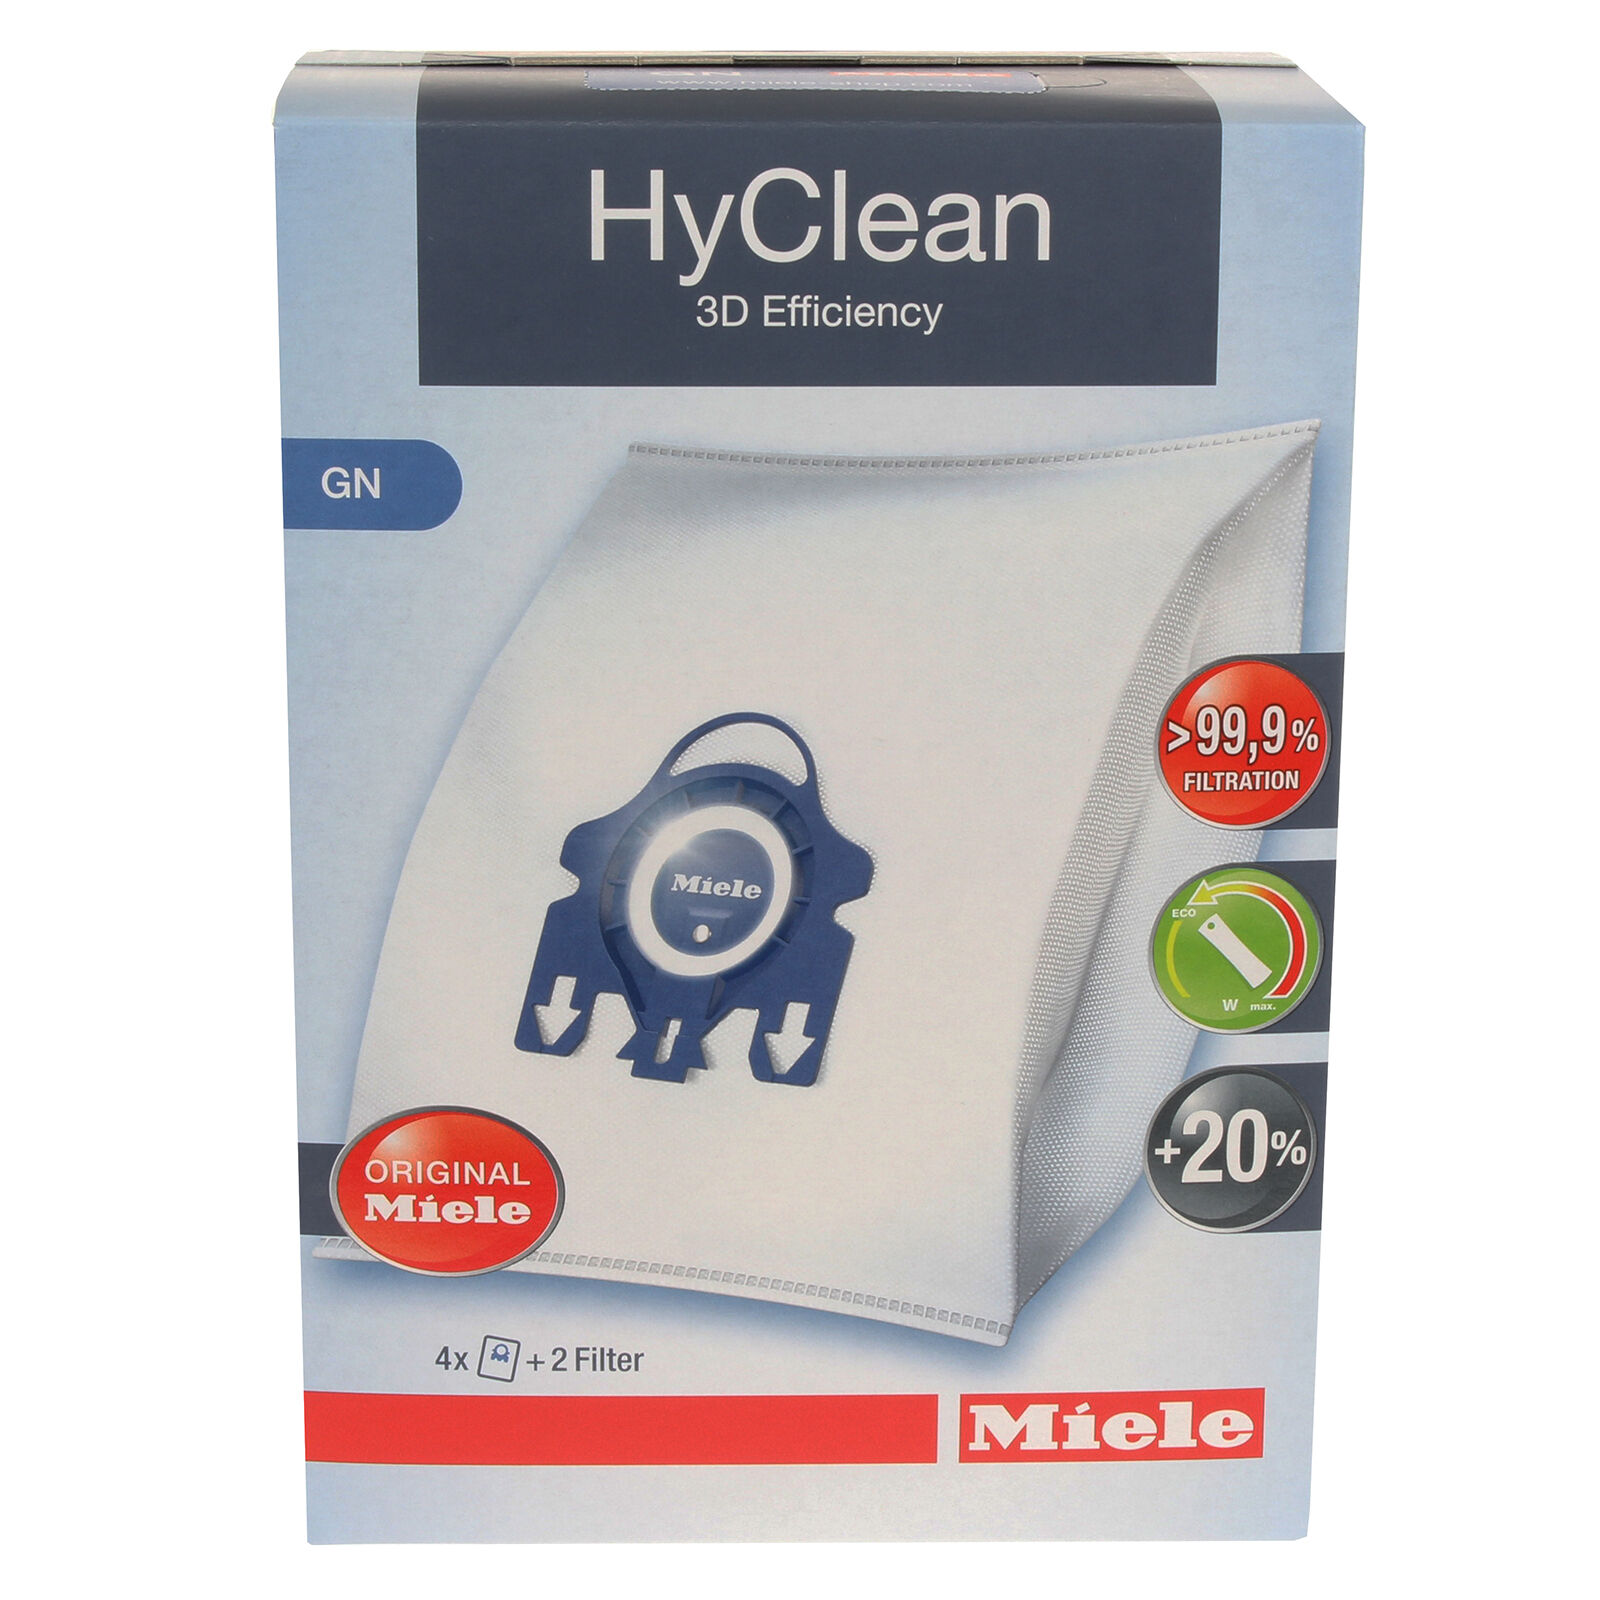 4x Genuine New 3d Efficiency Hyclean Dust Bags For Miele Gn Vacuum Cleaners